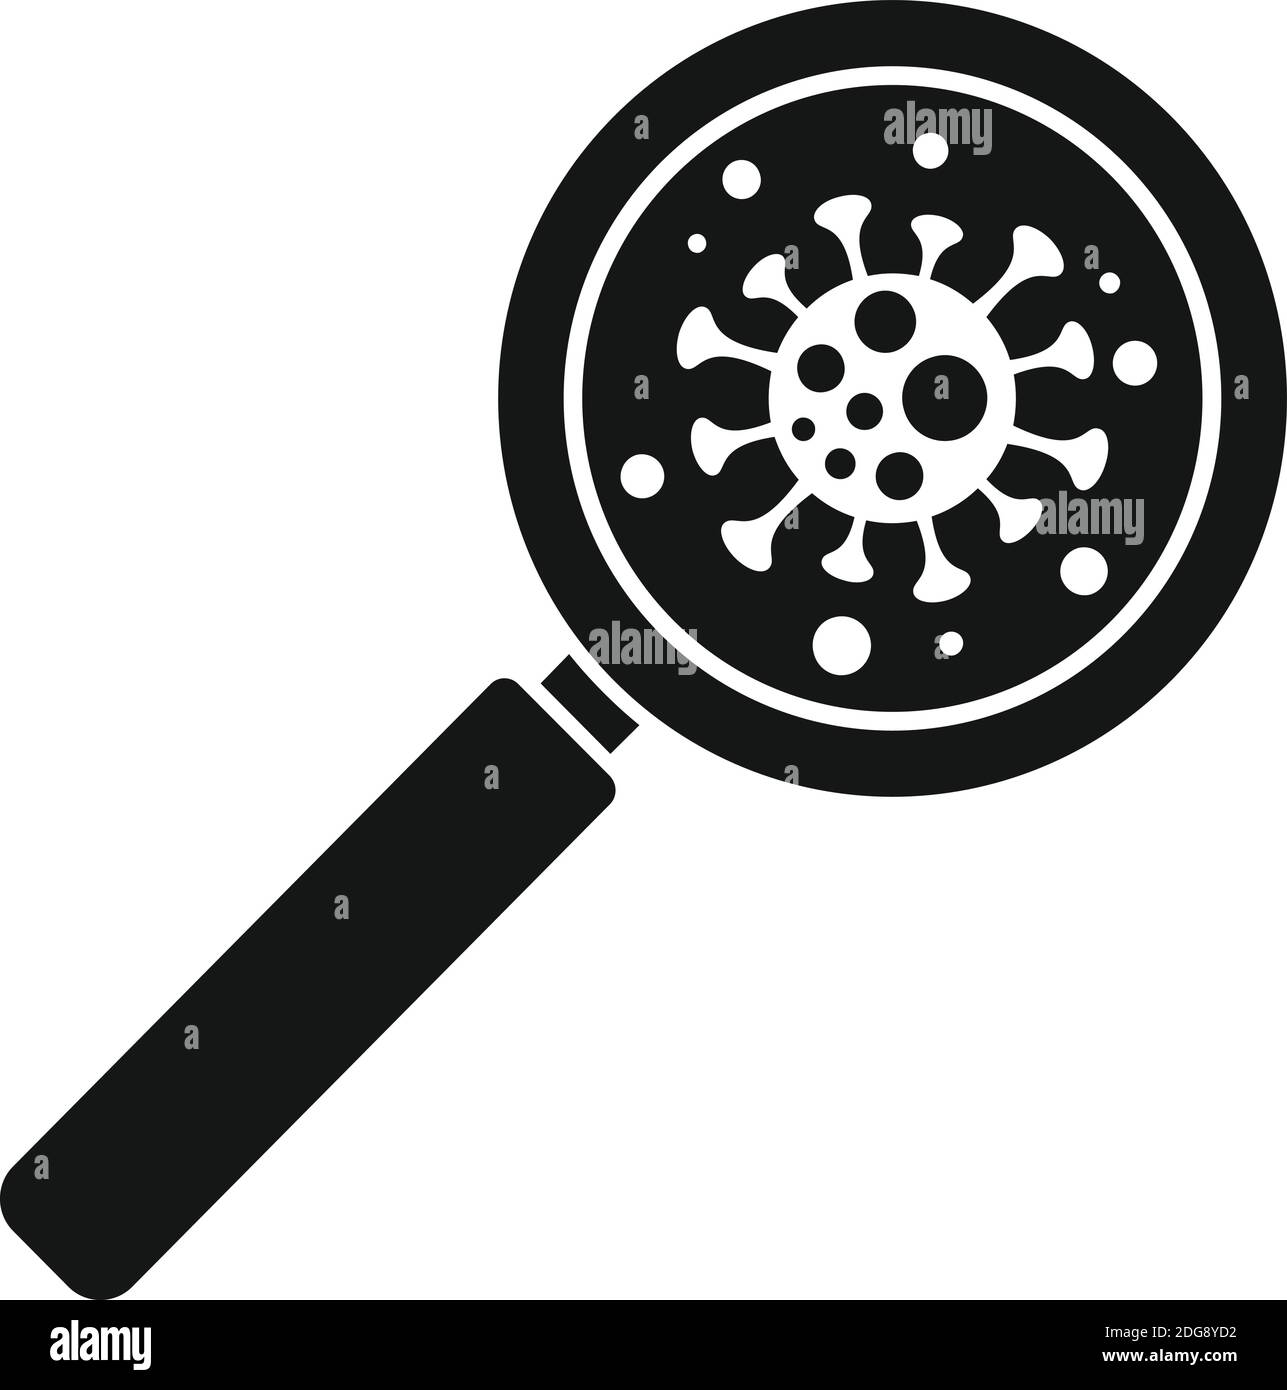 Chicken pox magnifier icon, simple style Stock Vector